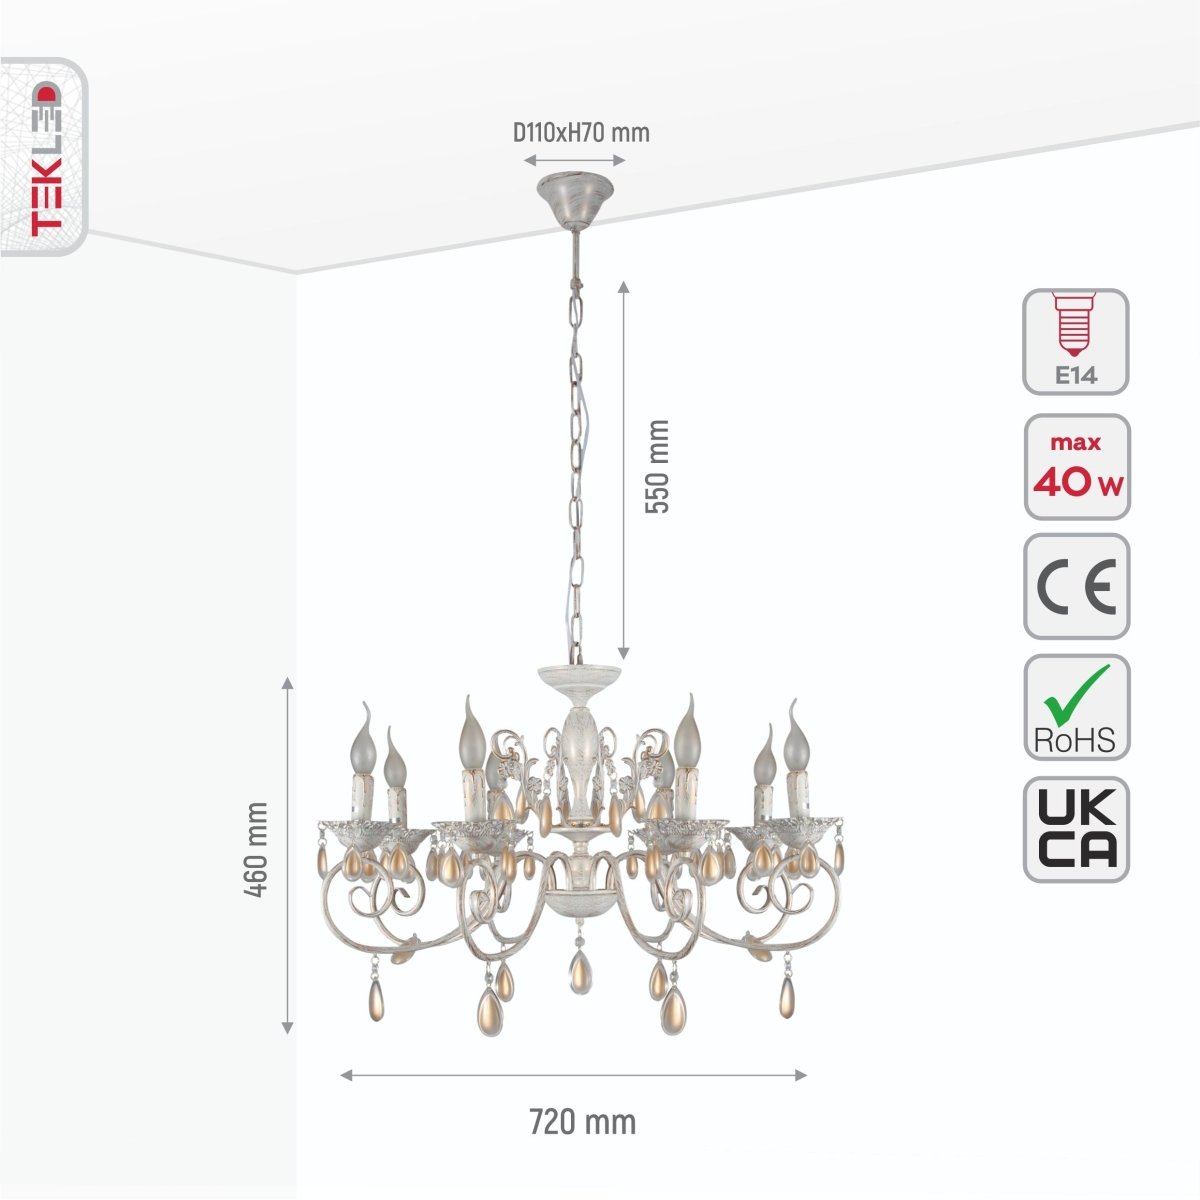 Size and specs of Amber Crystals Rice White with Gold Brushed Metal 8 Arm Chandelier with E14 Fitting | TEKLED 158-17852